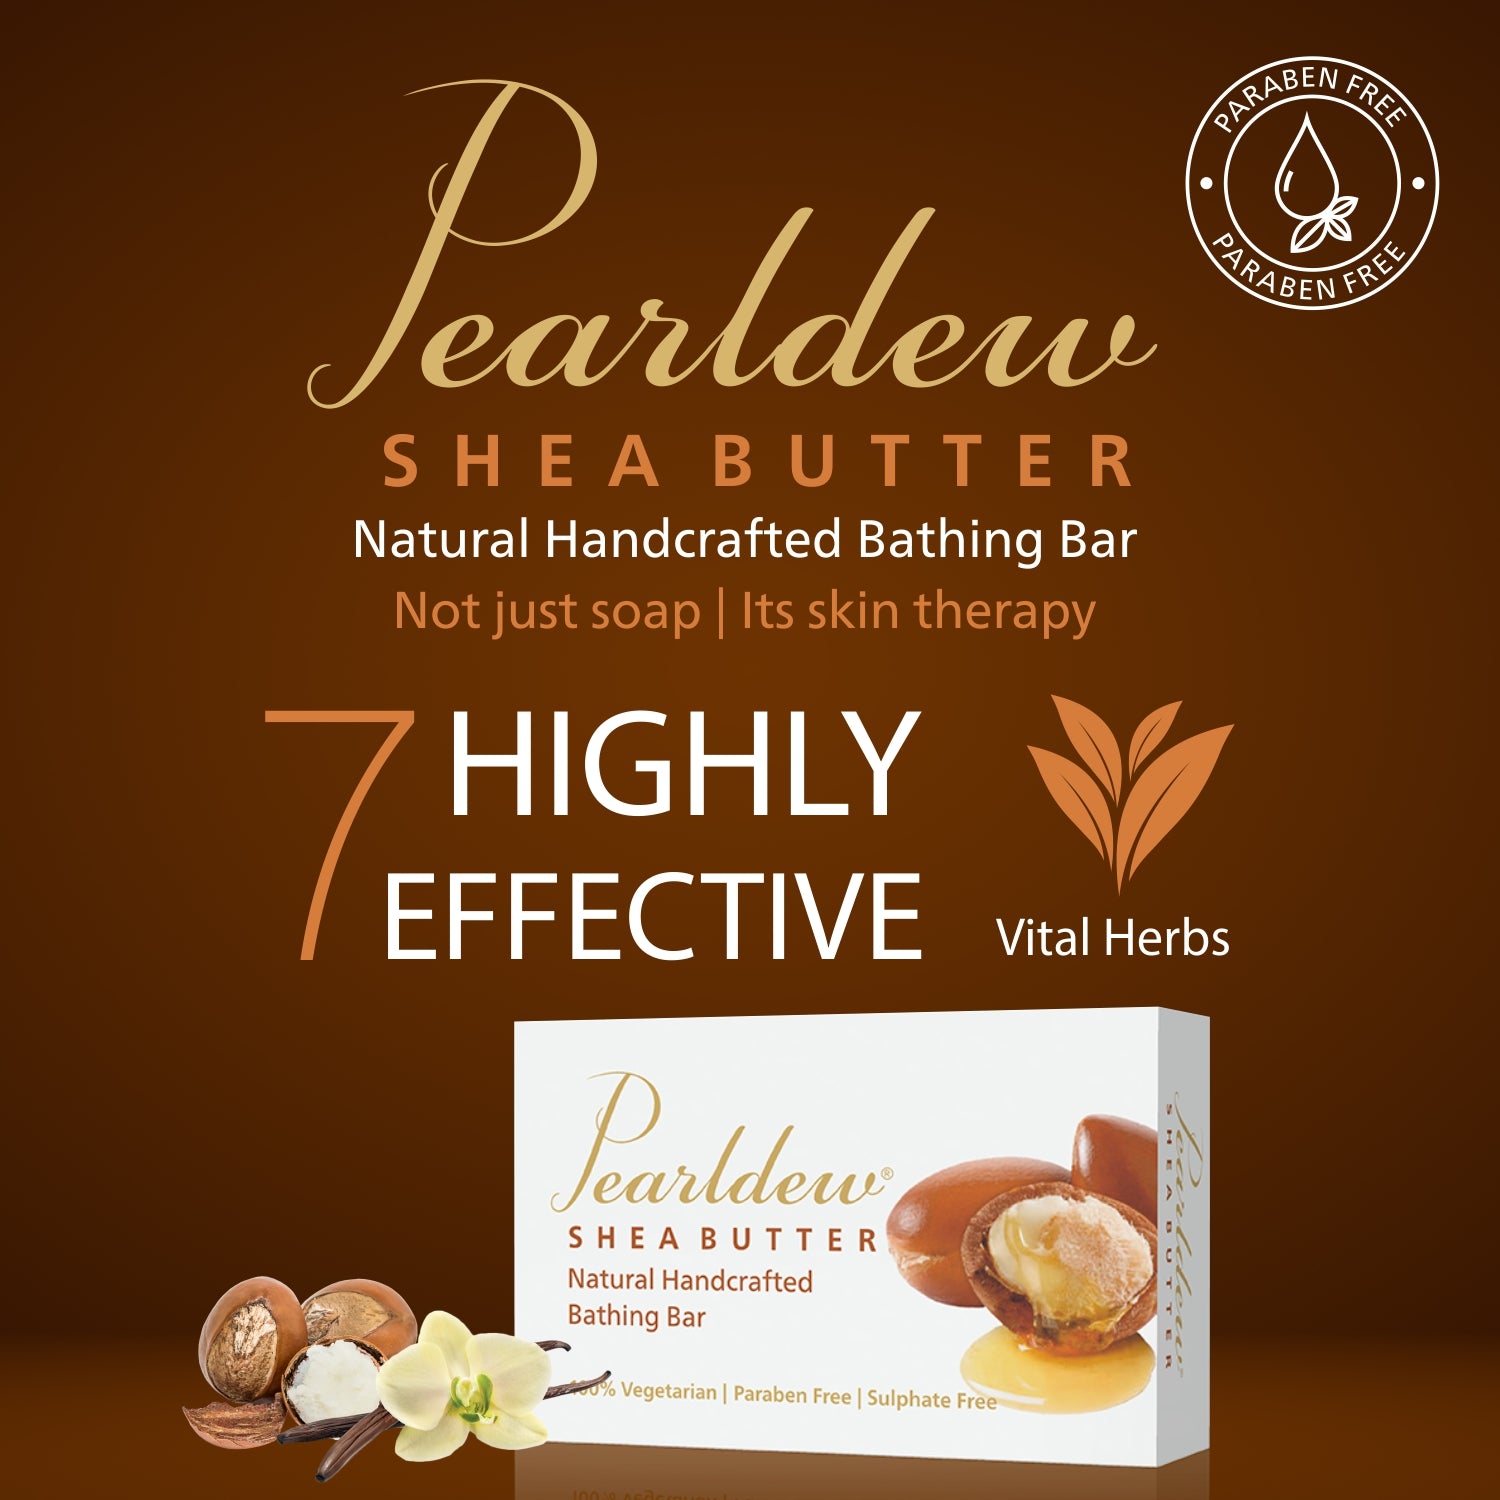 Pearldew Shea Butter Natural Handcrafted Bathing Bar (75 gm)